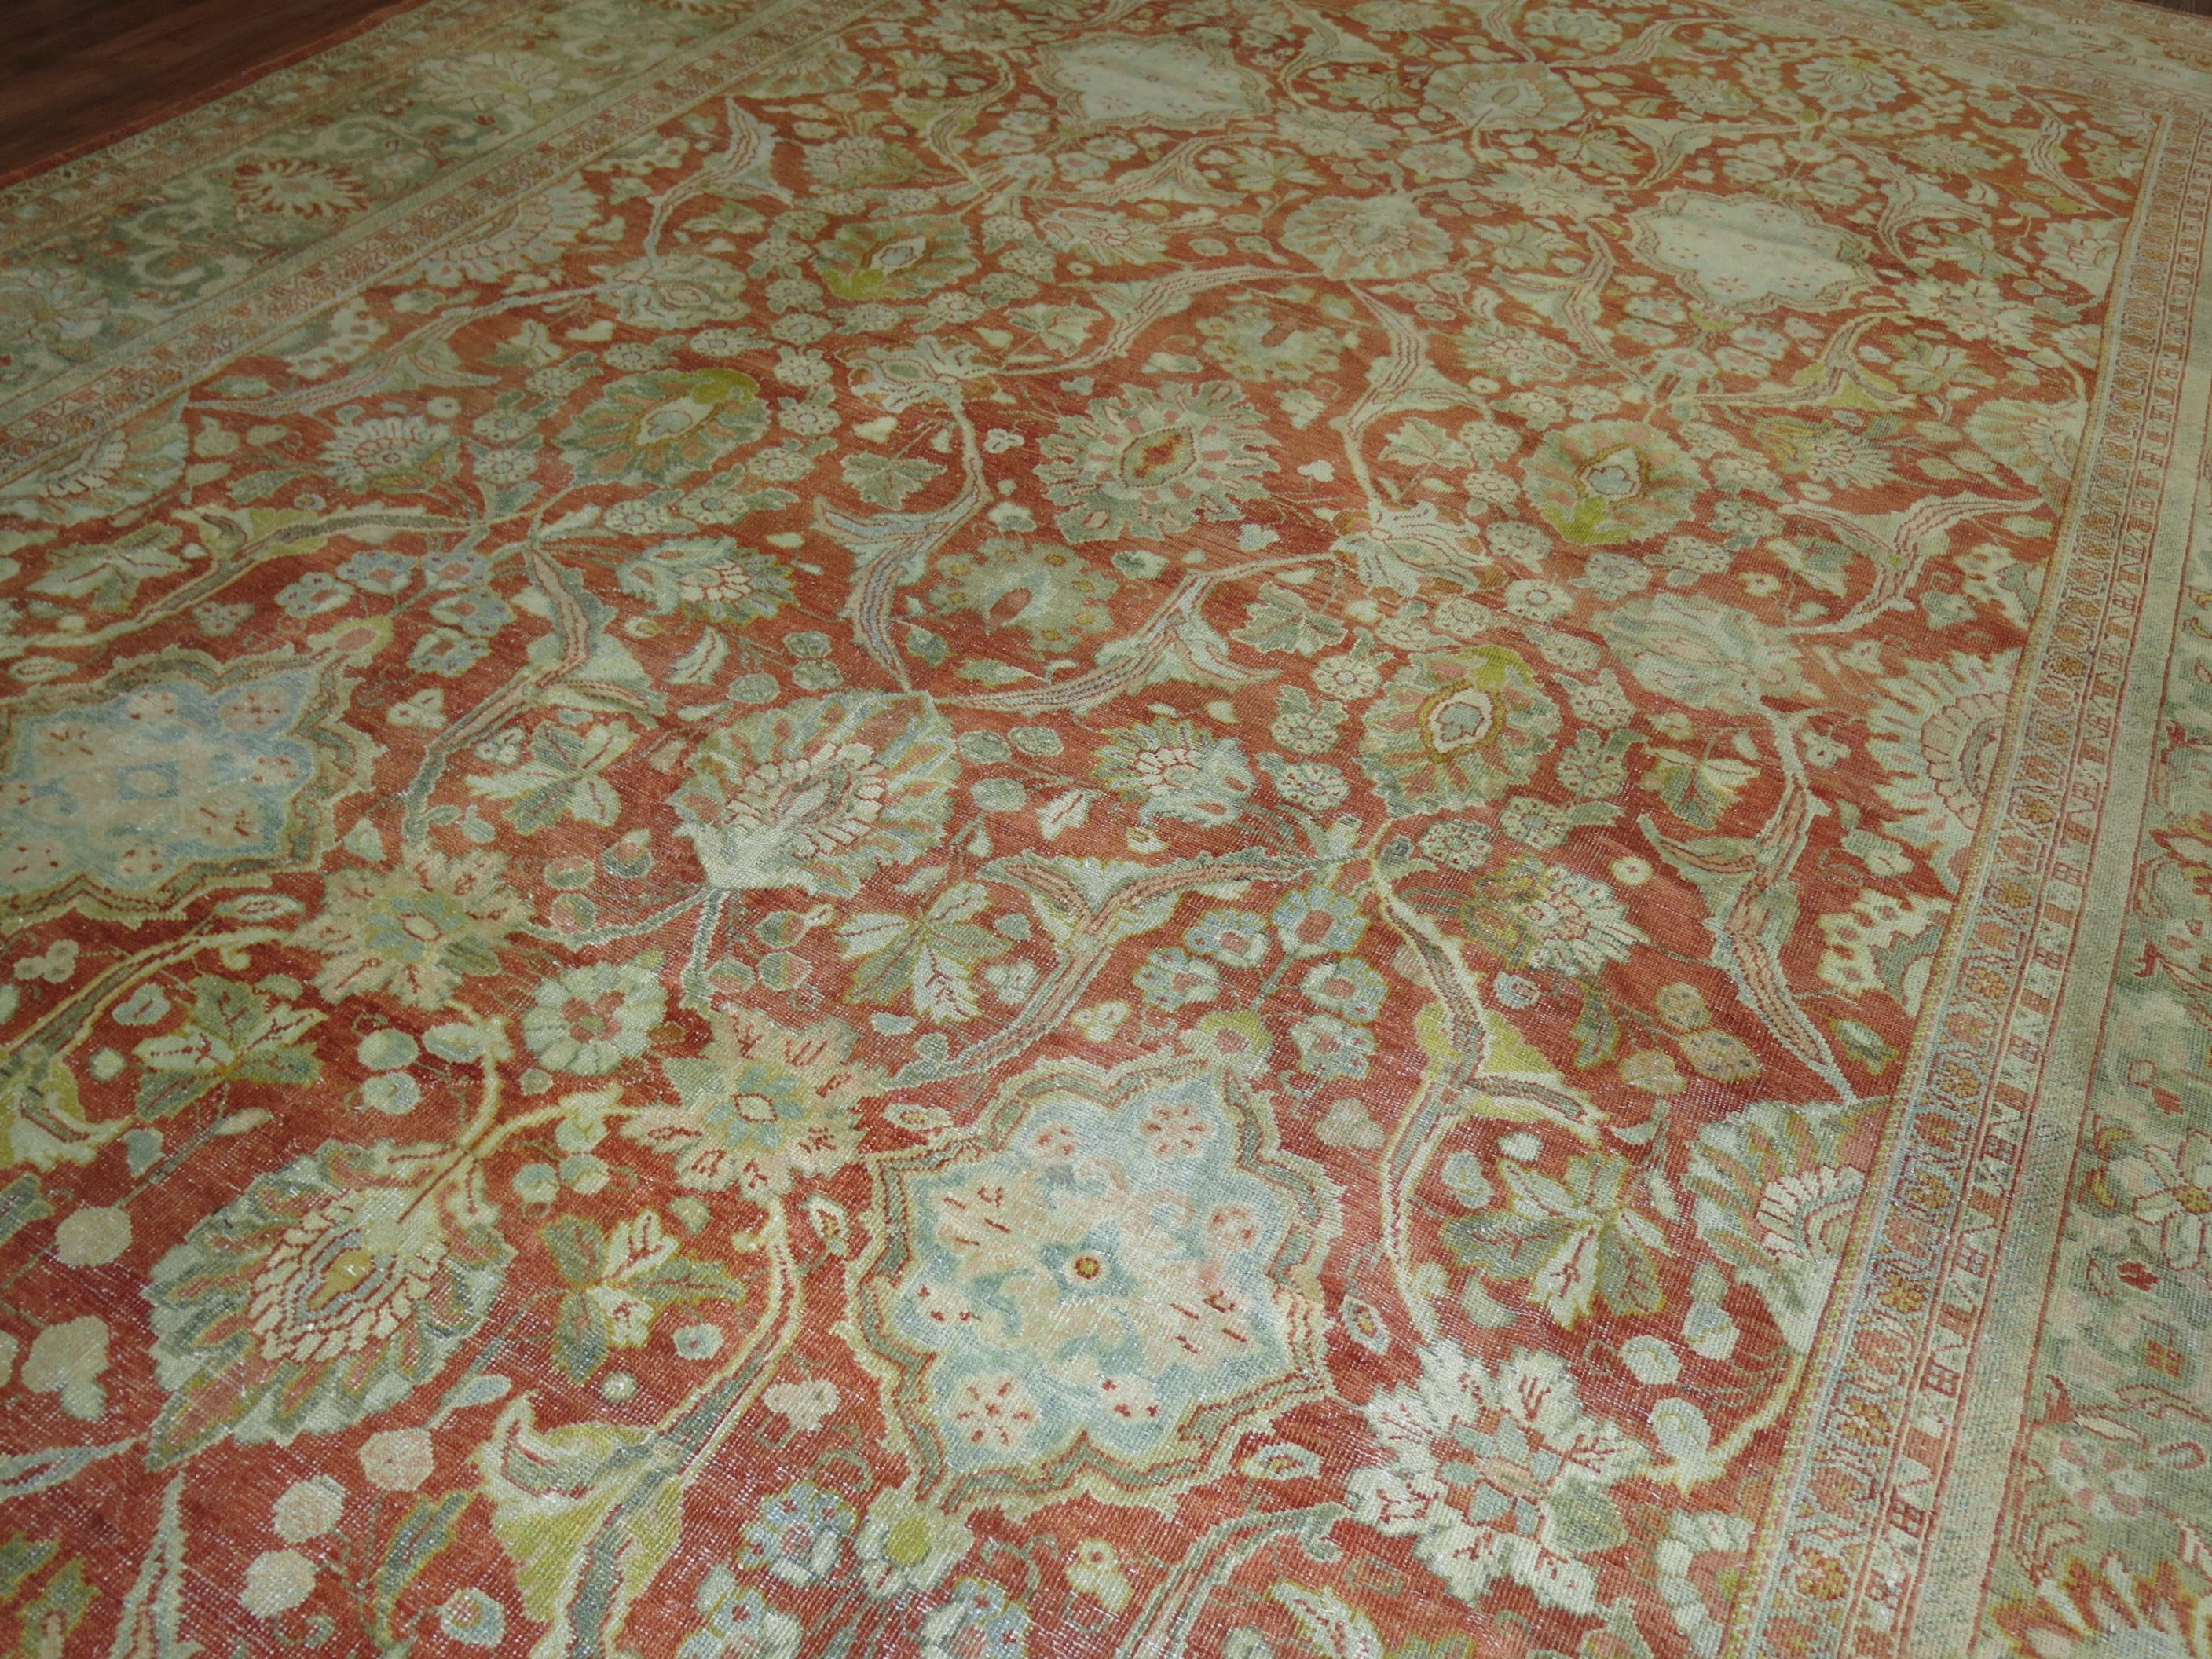 Zabihi Collection Oversize Antique Sultanabad Mahal Persian Carpet For Sale 6